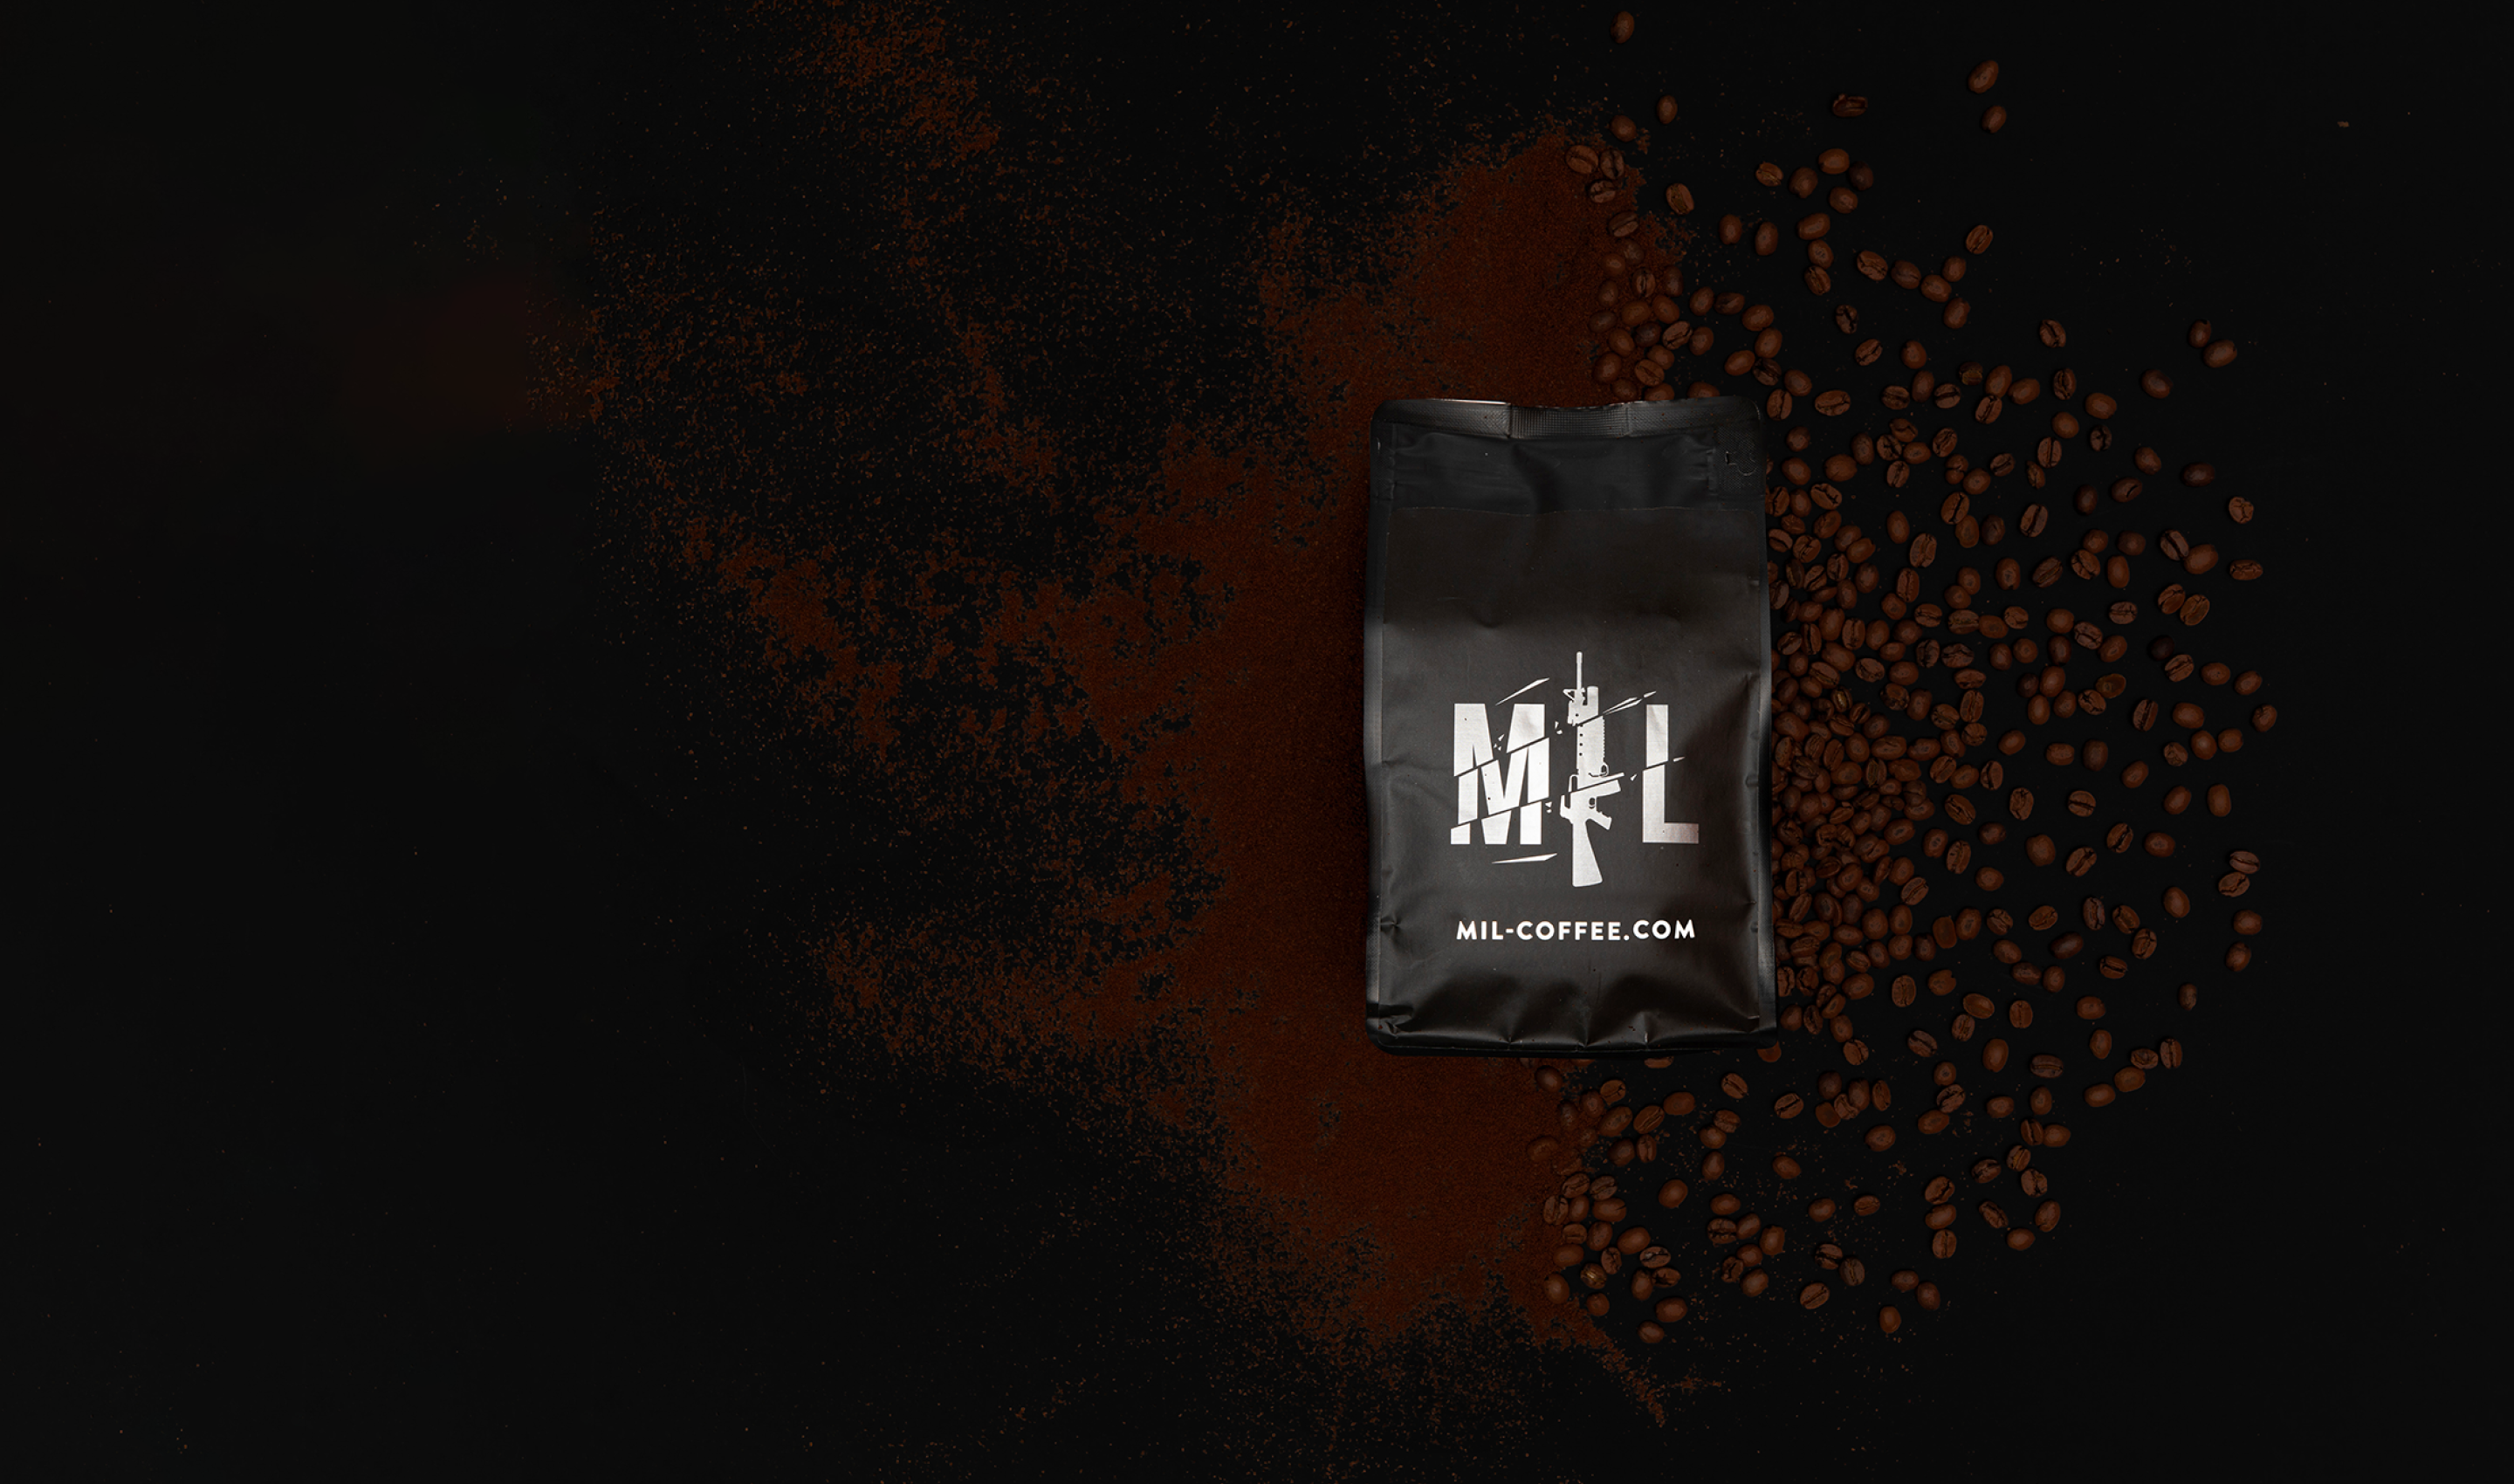 Mil-Coffee beans package with coffee beans underneath it.